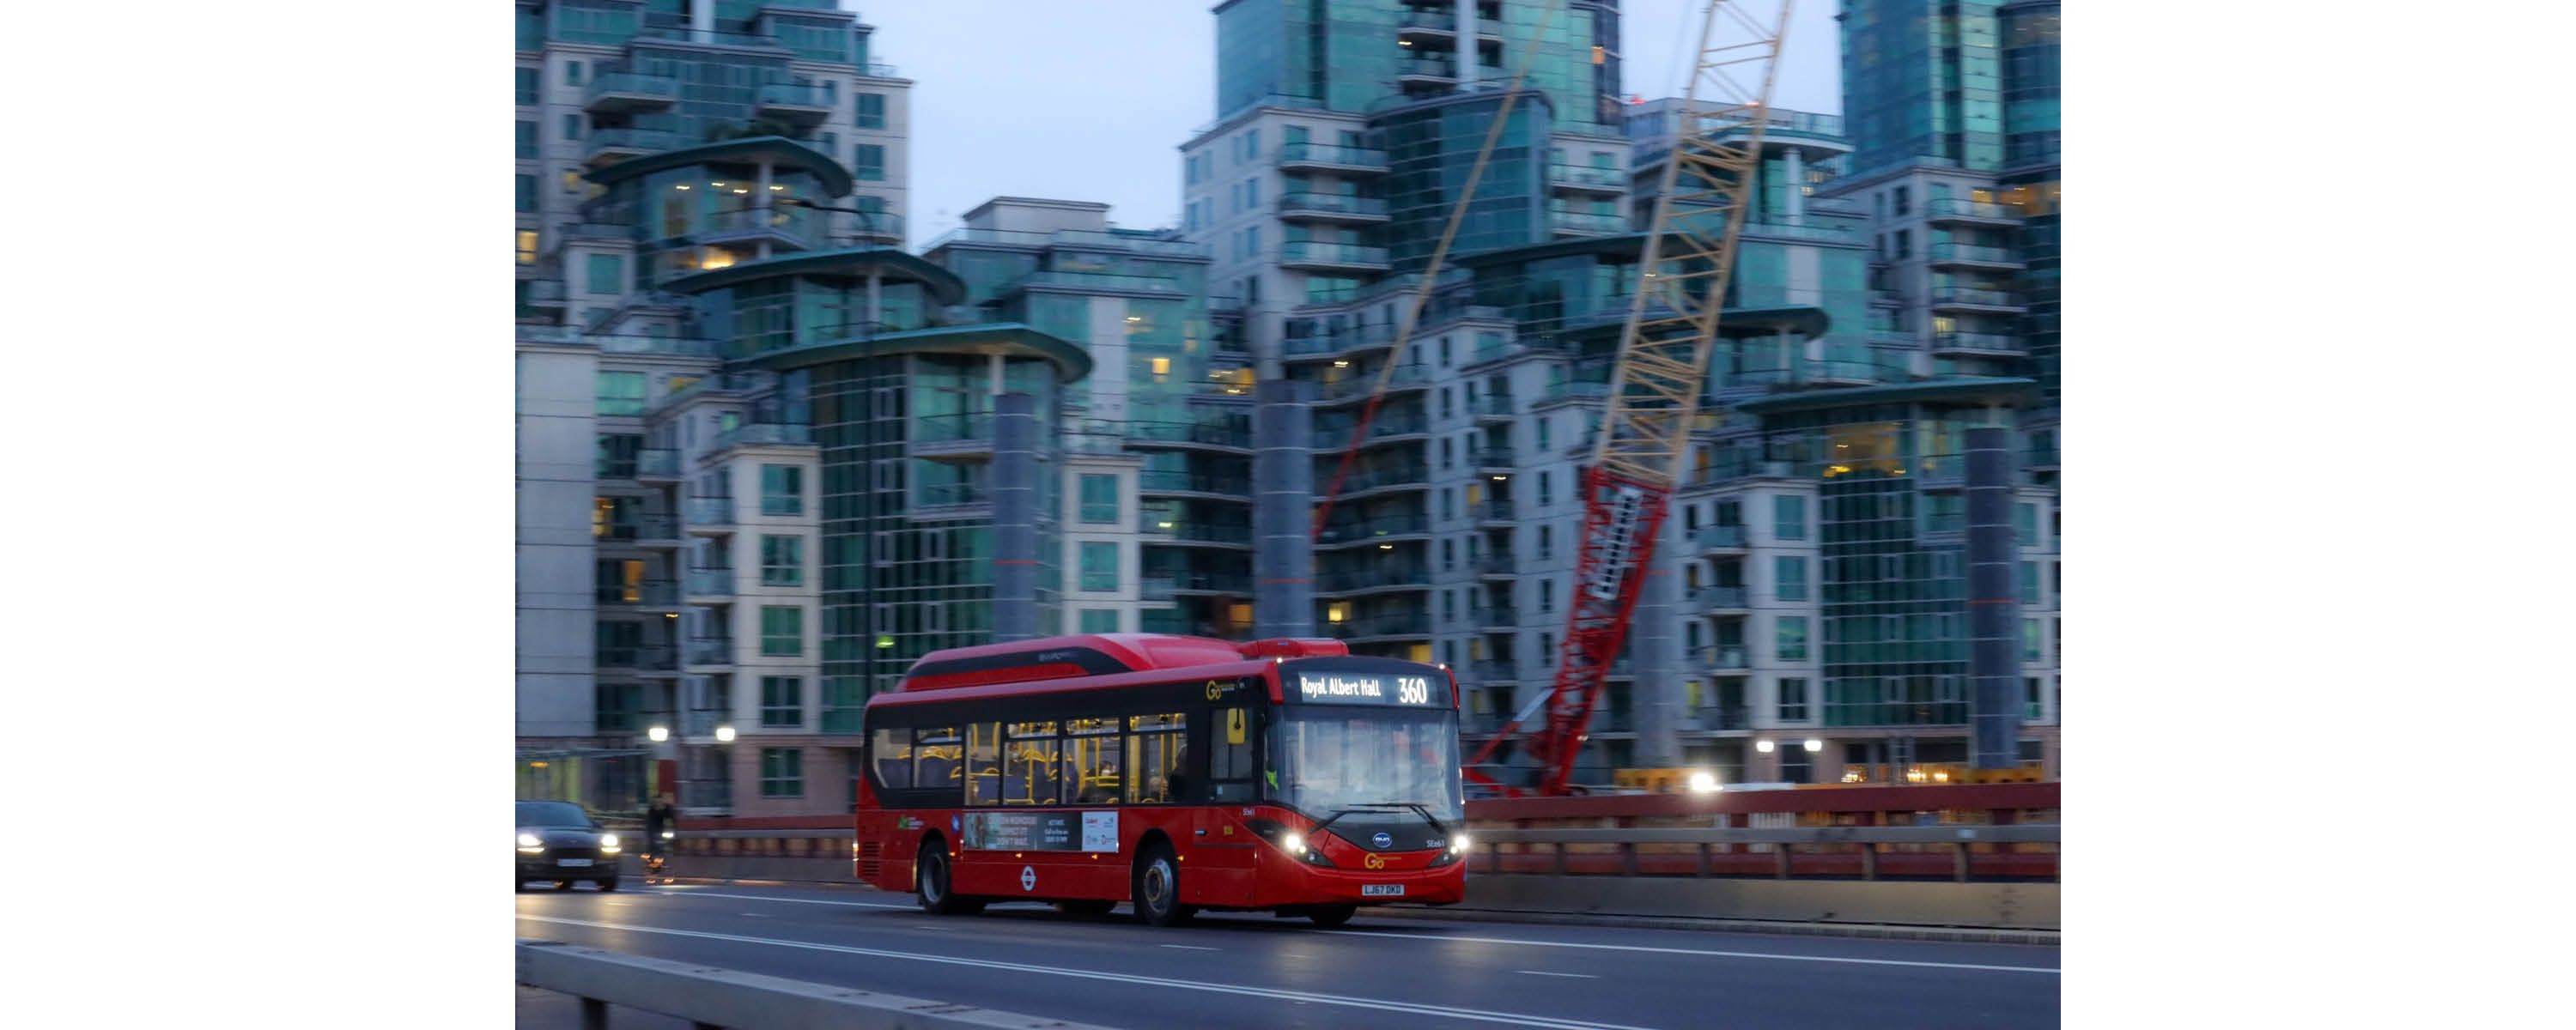 A bus in London